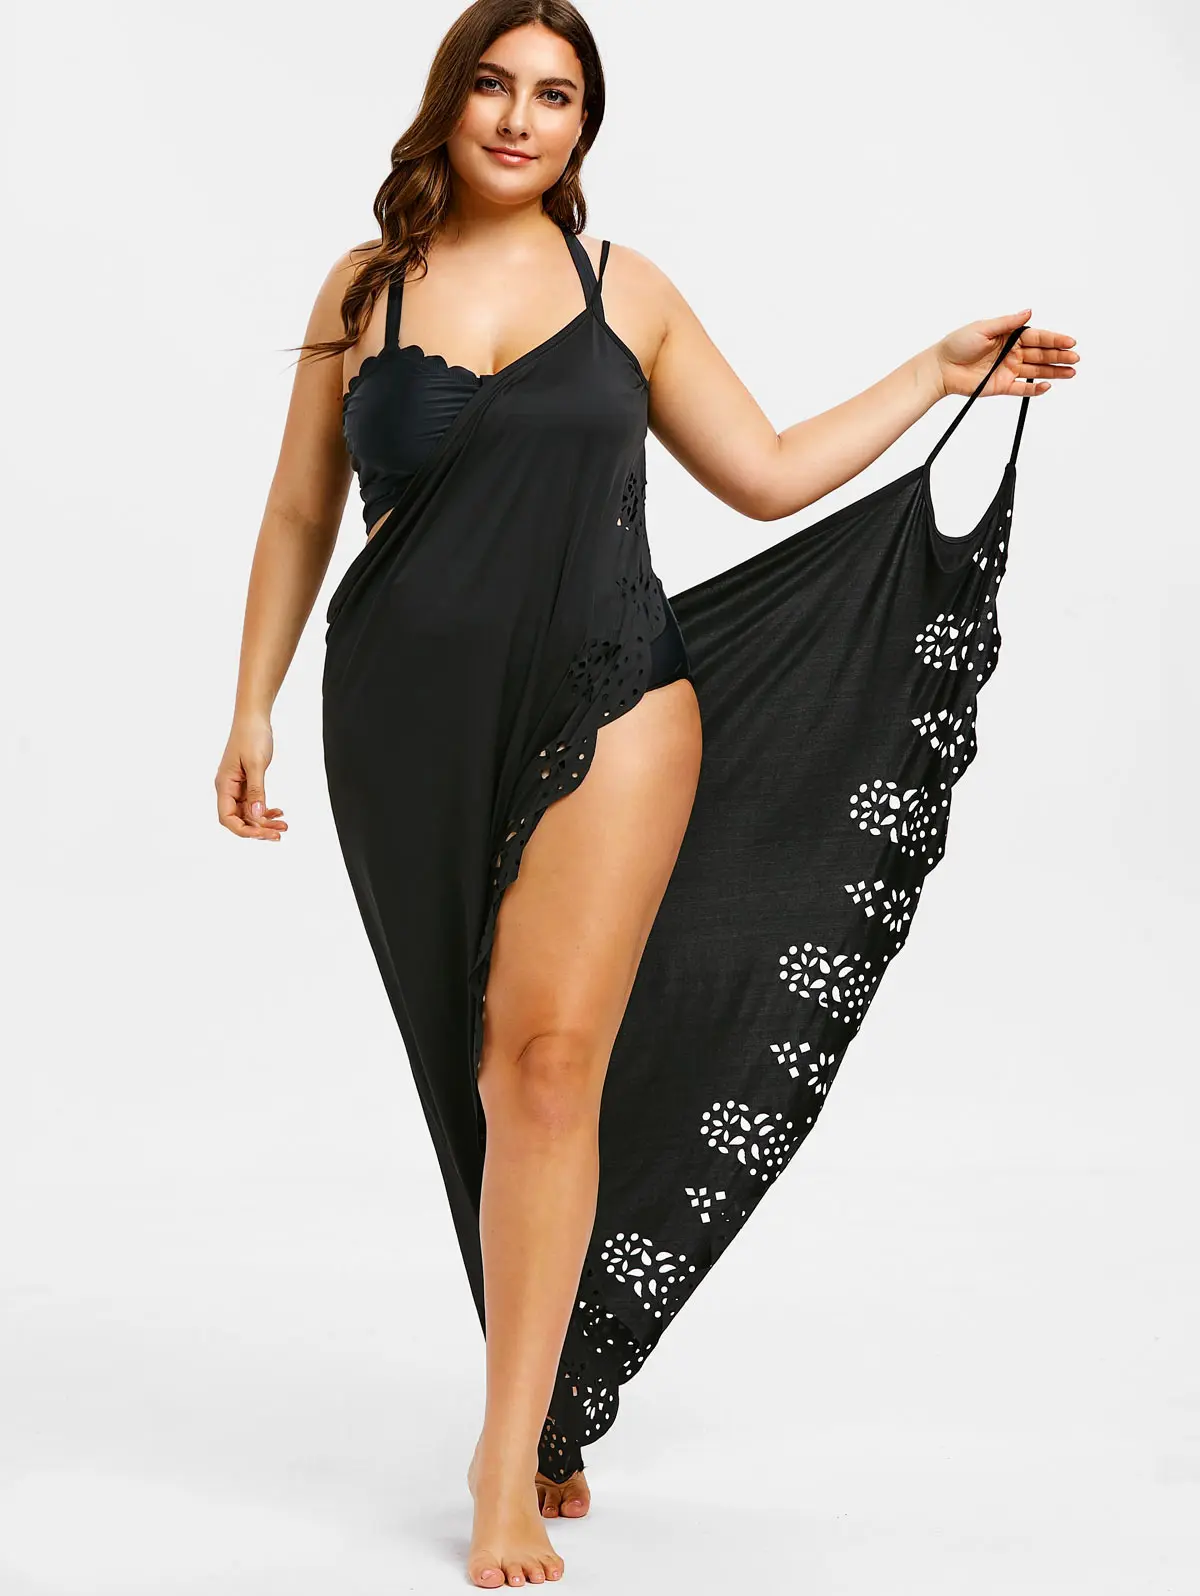 Womens Solid Beach Wrap Dress Strap Summer Bikini Cover Up Dress Party Plus Size